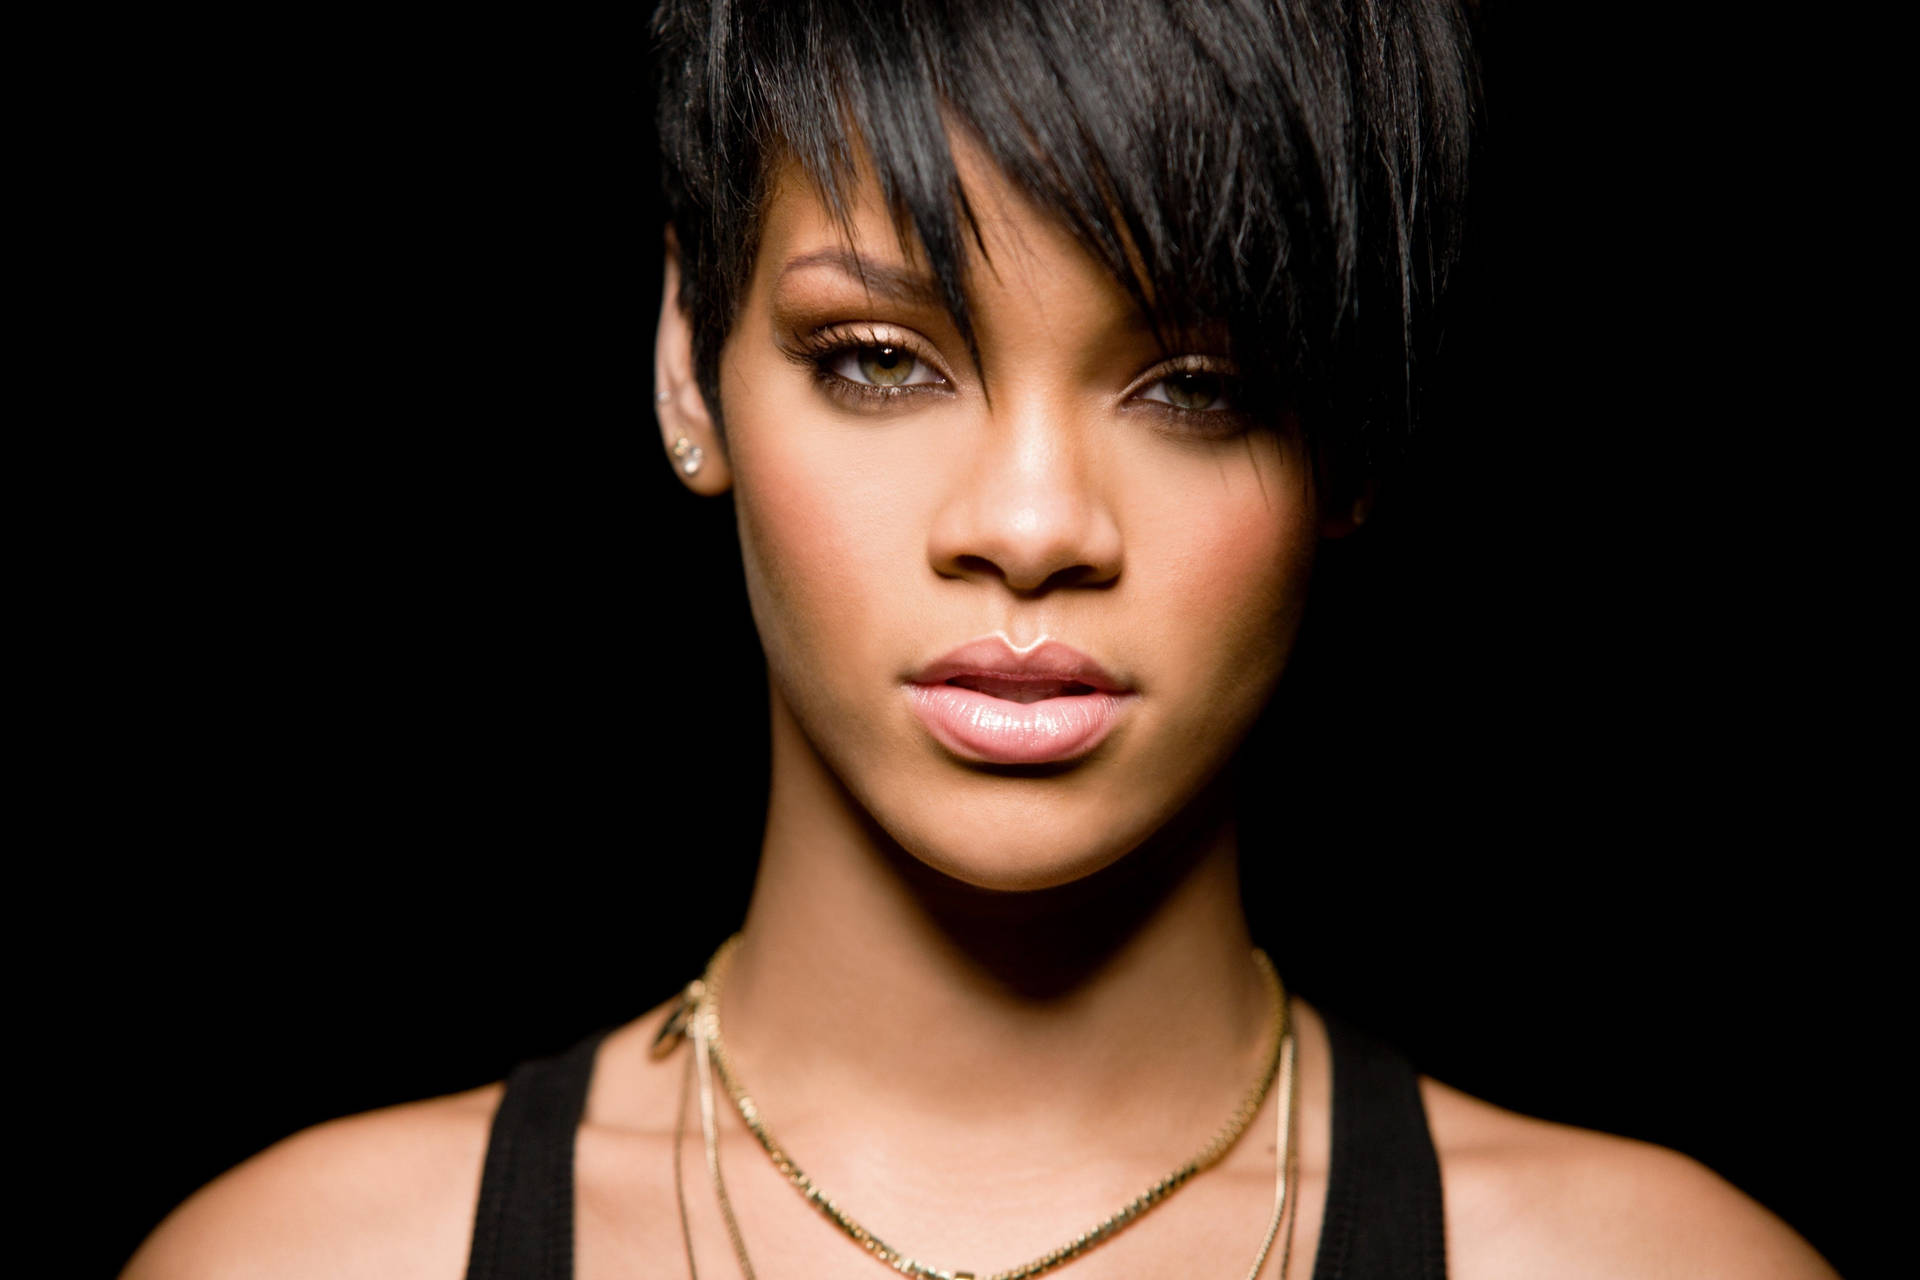 Rihanna 5616X3744 Wallpaper and Background Image